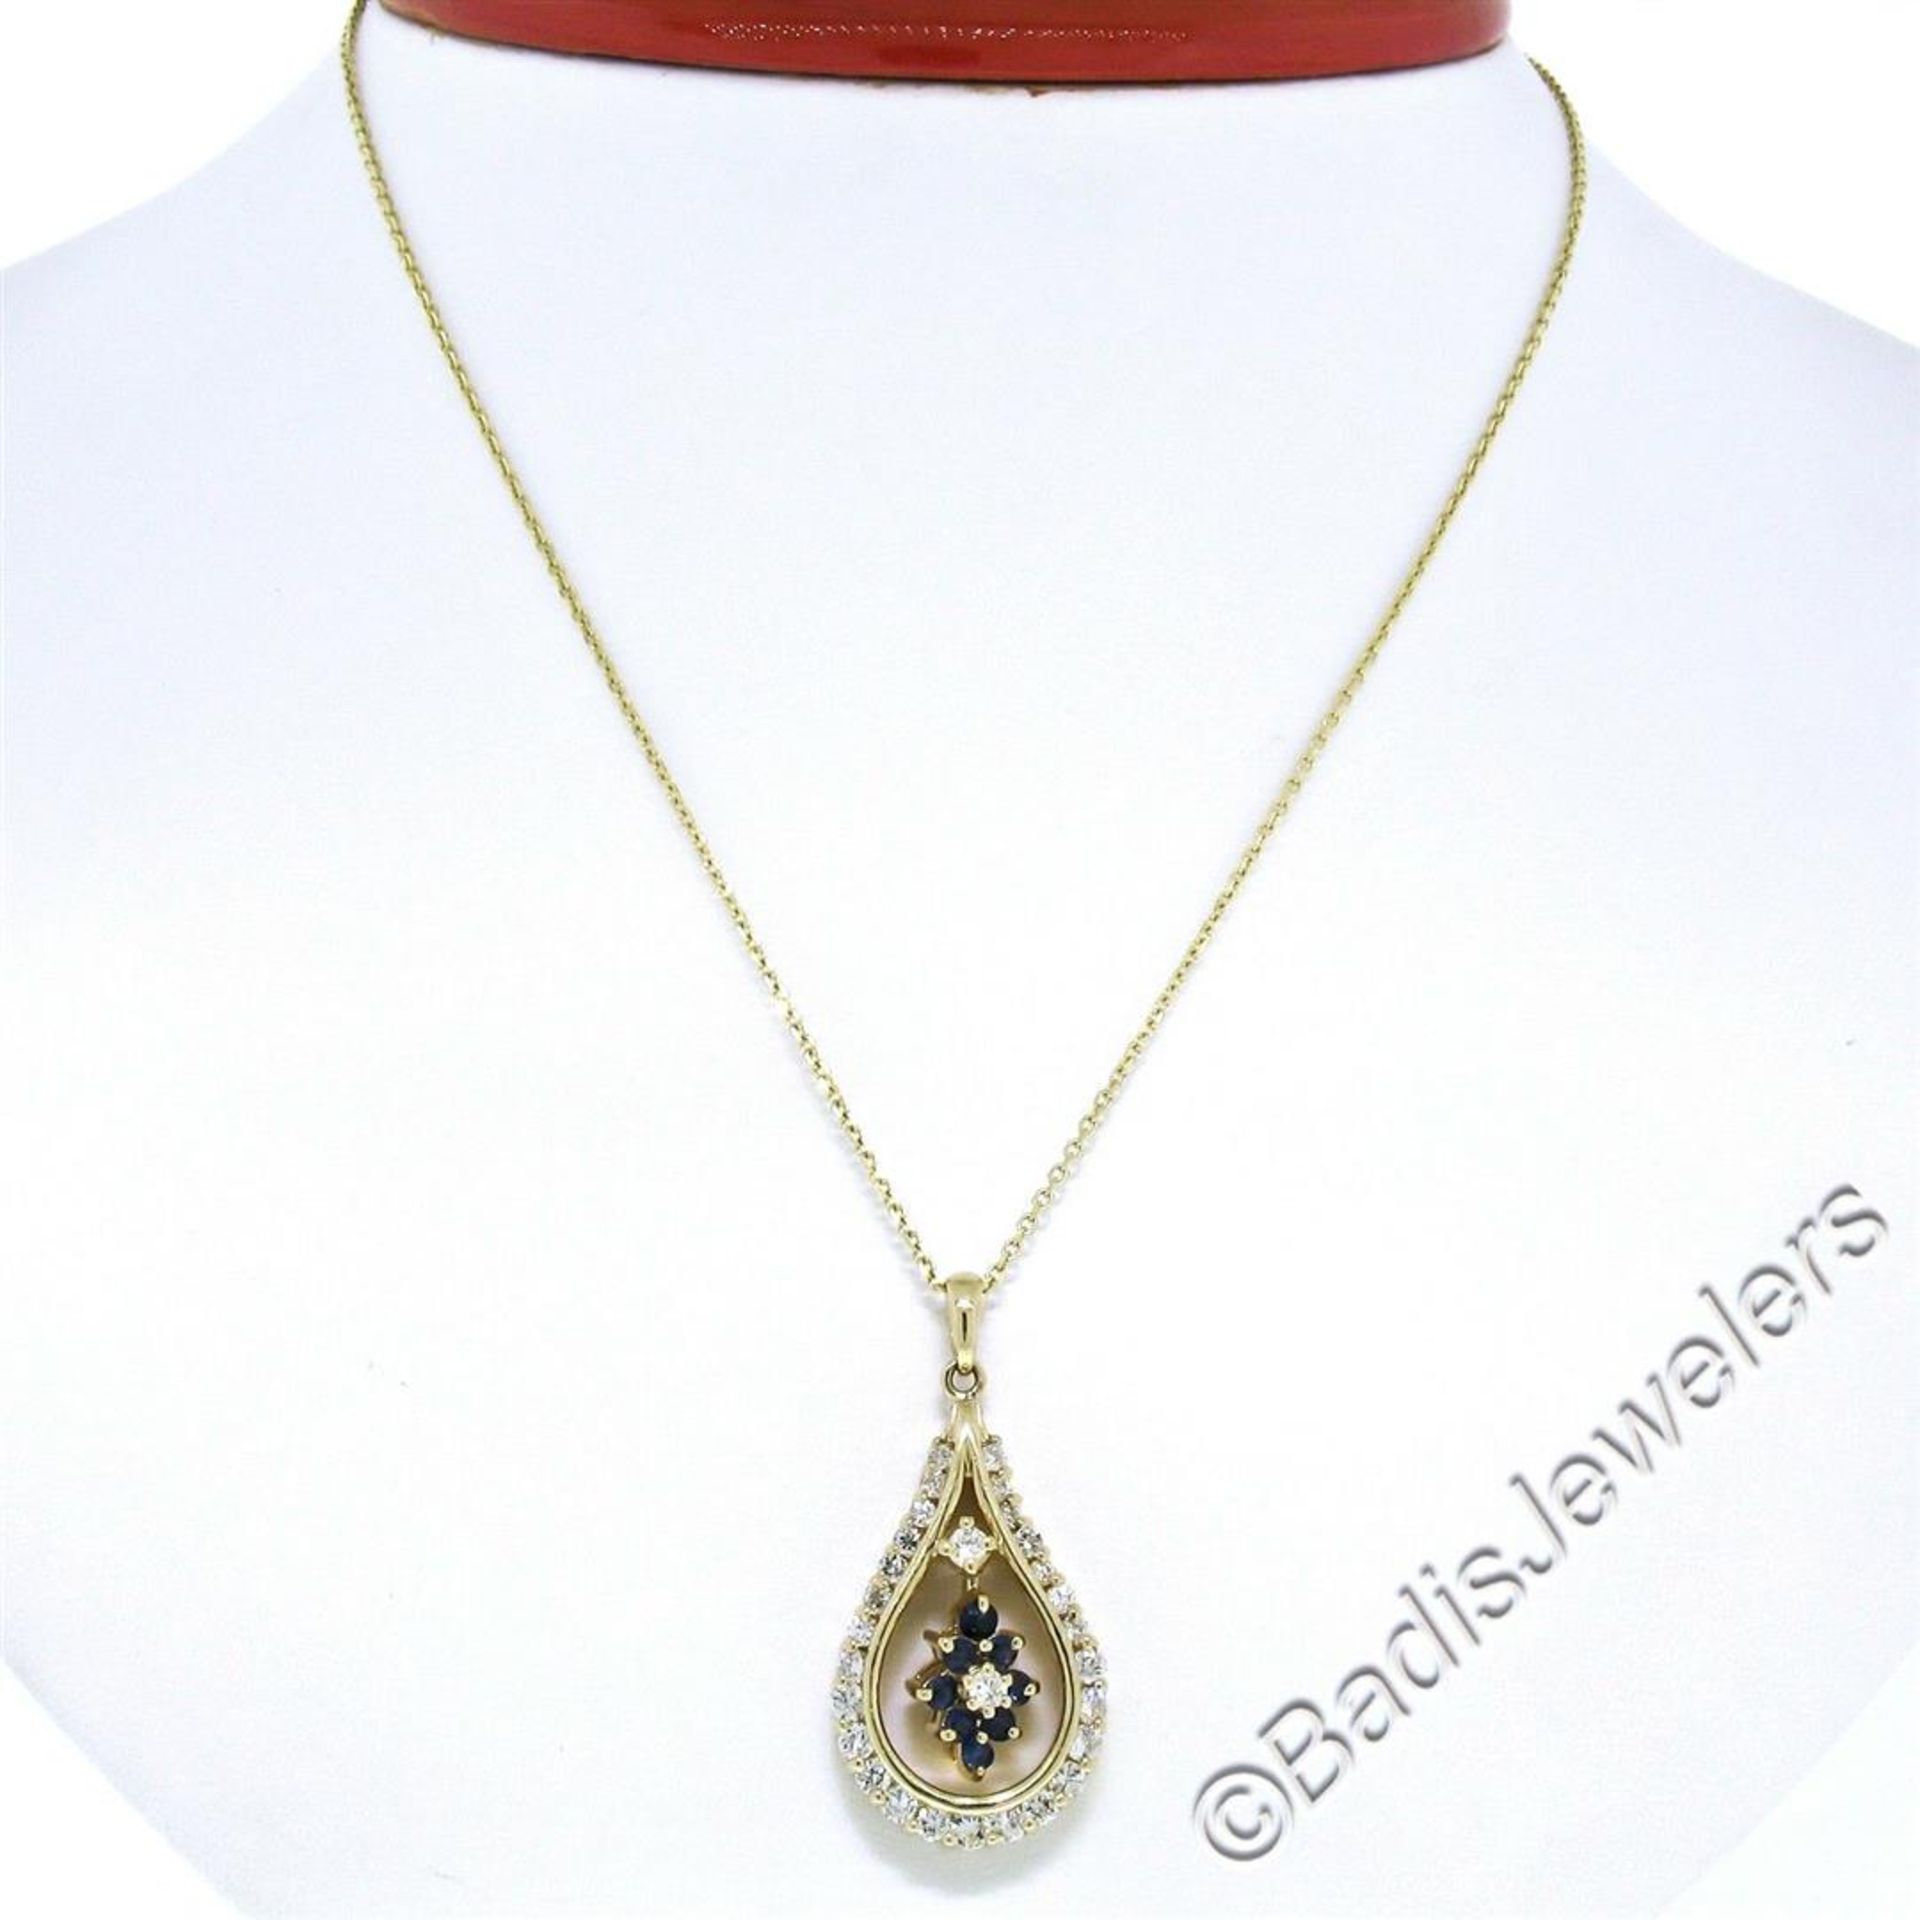 14kt Yellow Gold 1.22ctw Diamond and Sapphire Tear Drop Dangle Pendant Necklace - Image 3 of 7